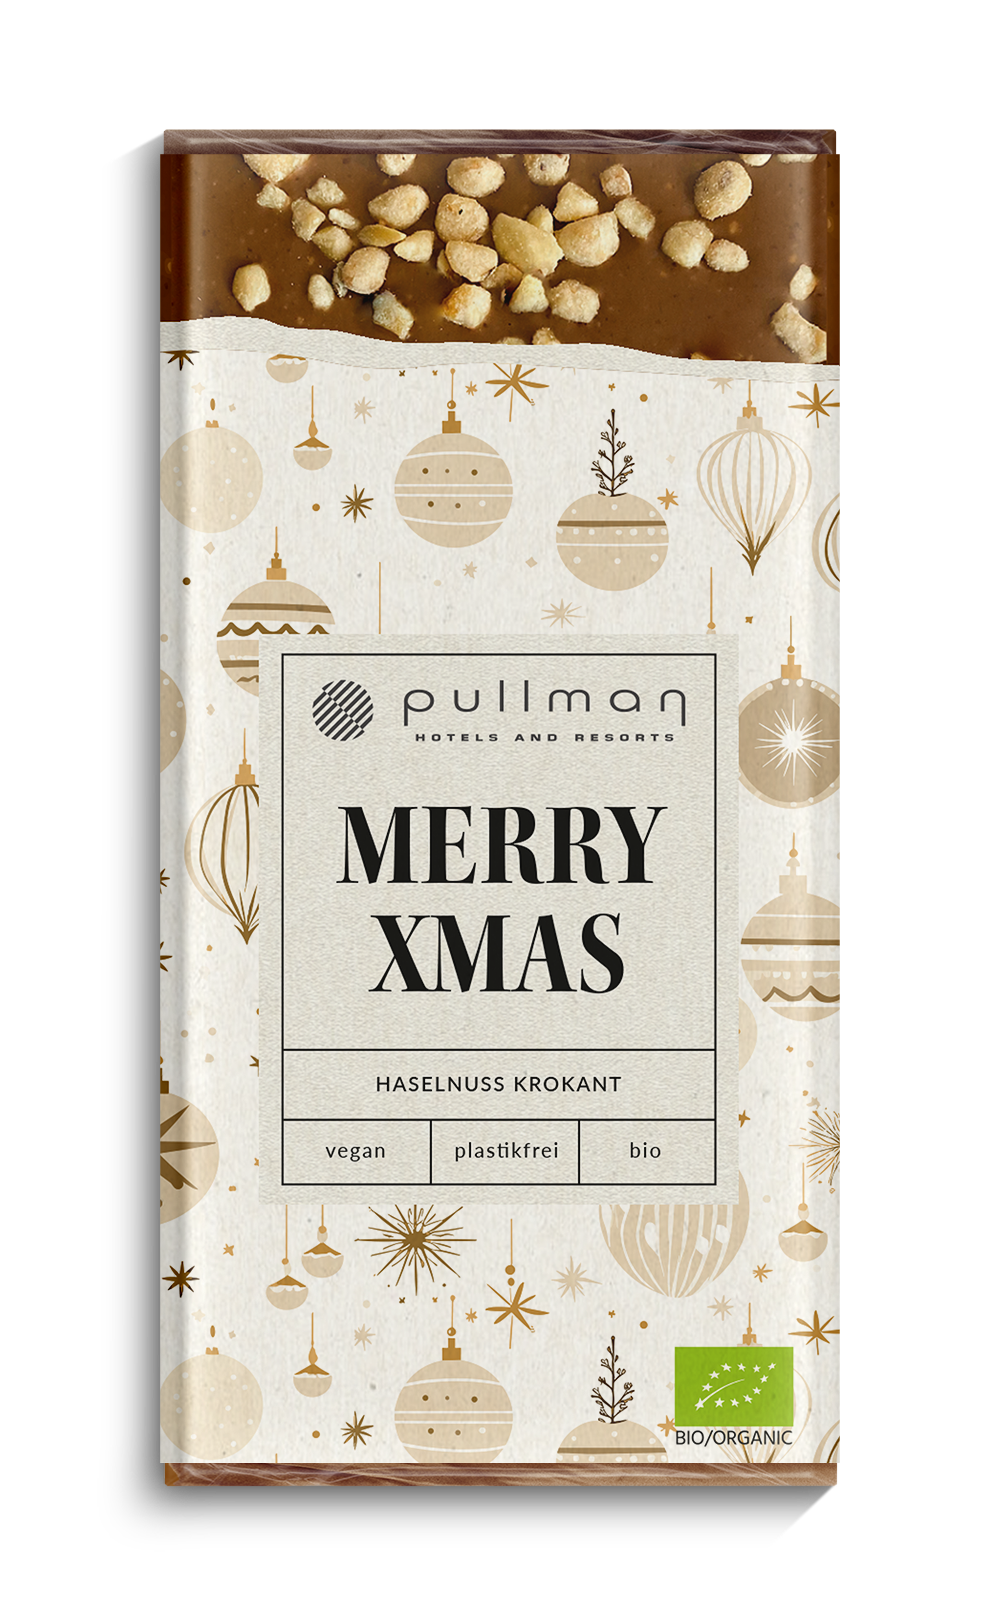 40g_pullman Weihnachtsdesign.png__PID:c84c9498-59ca-4caf-b52e-8f0a419d3009